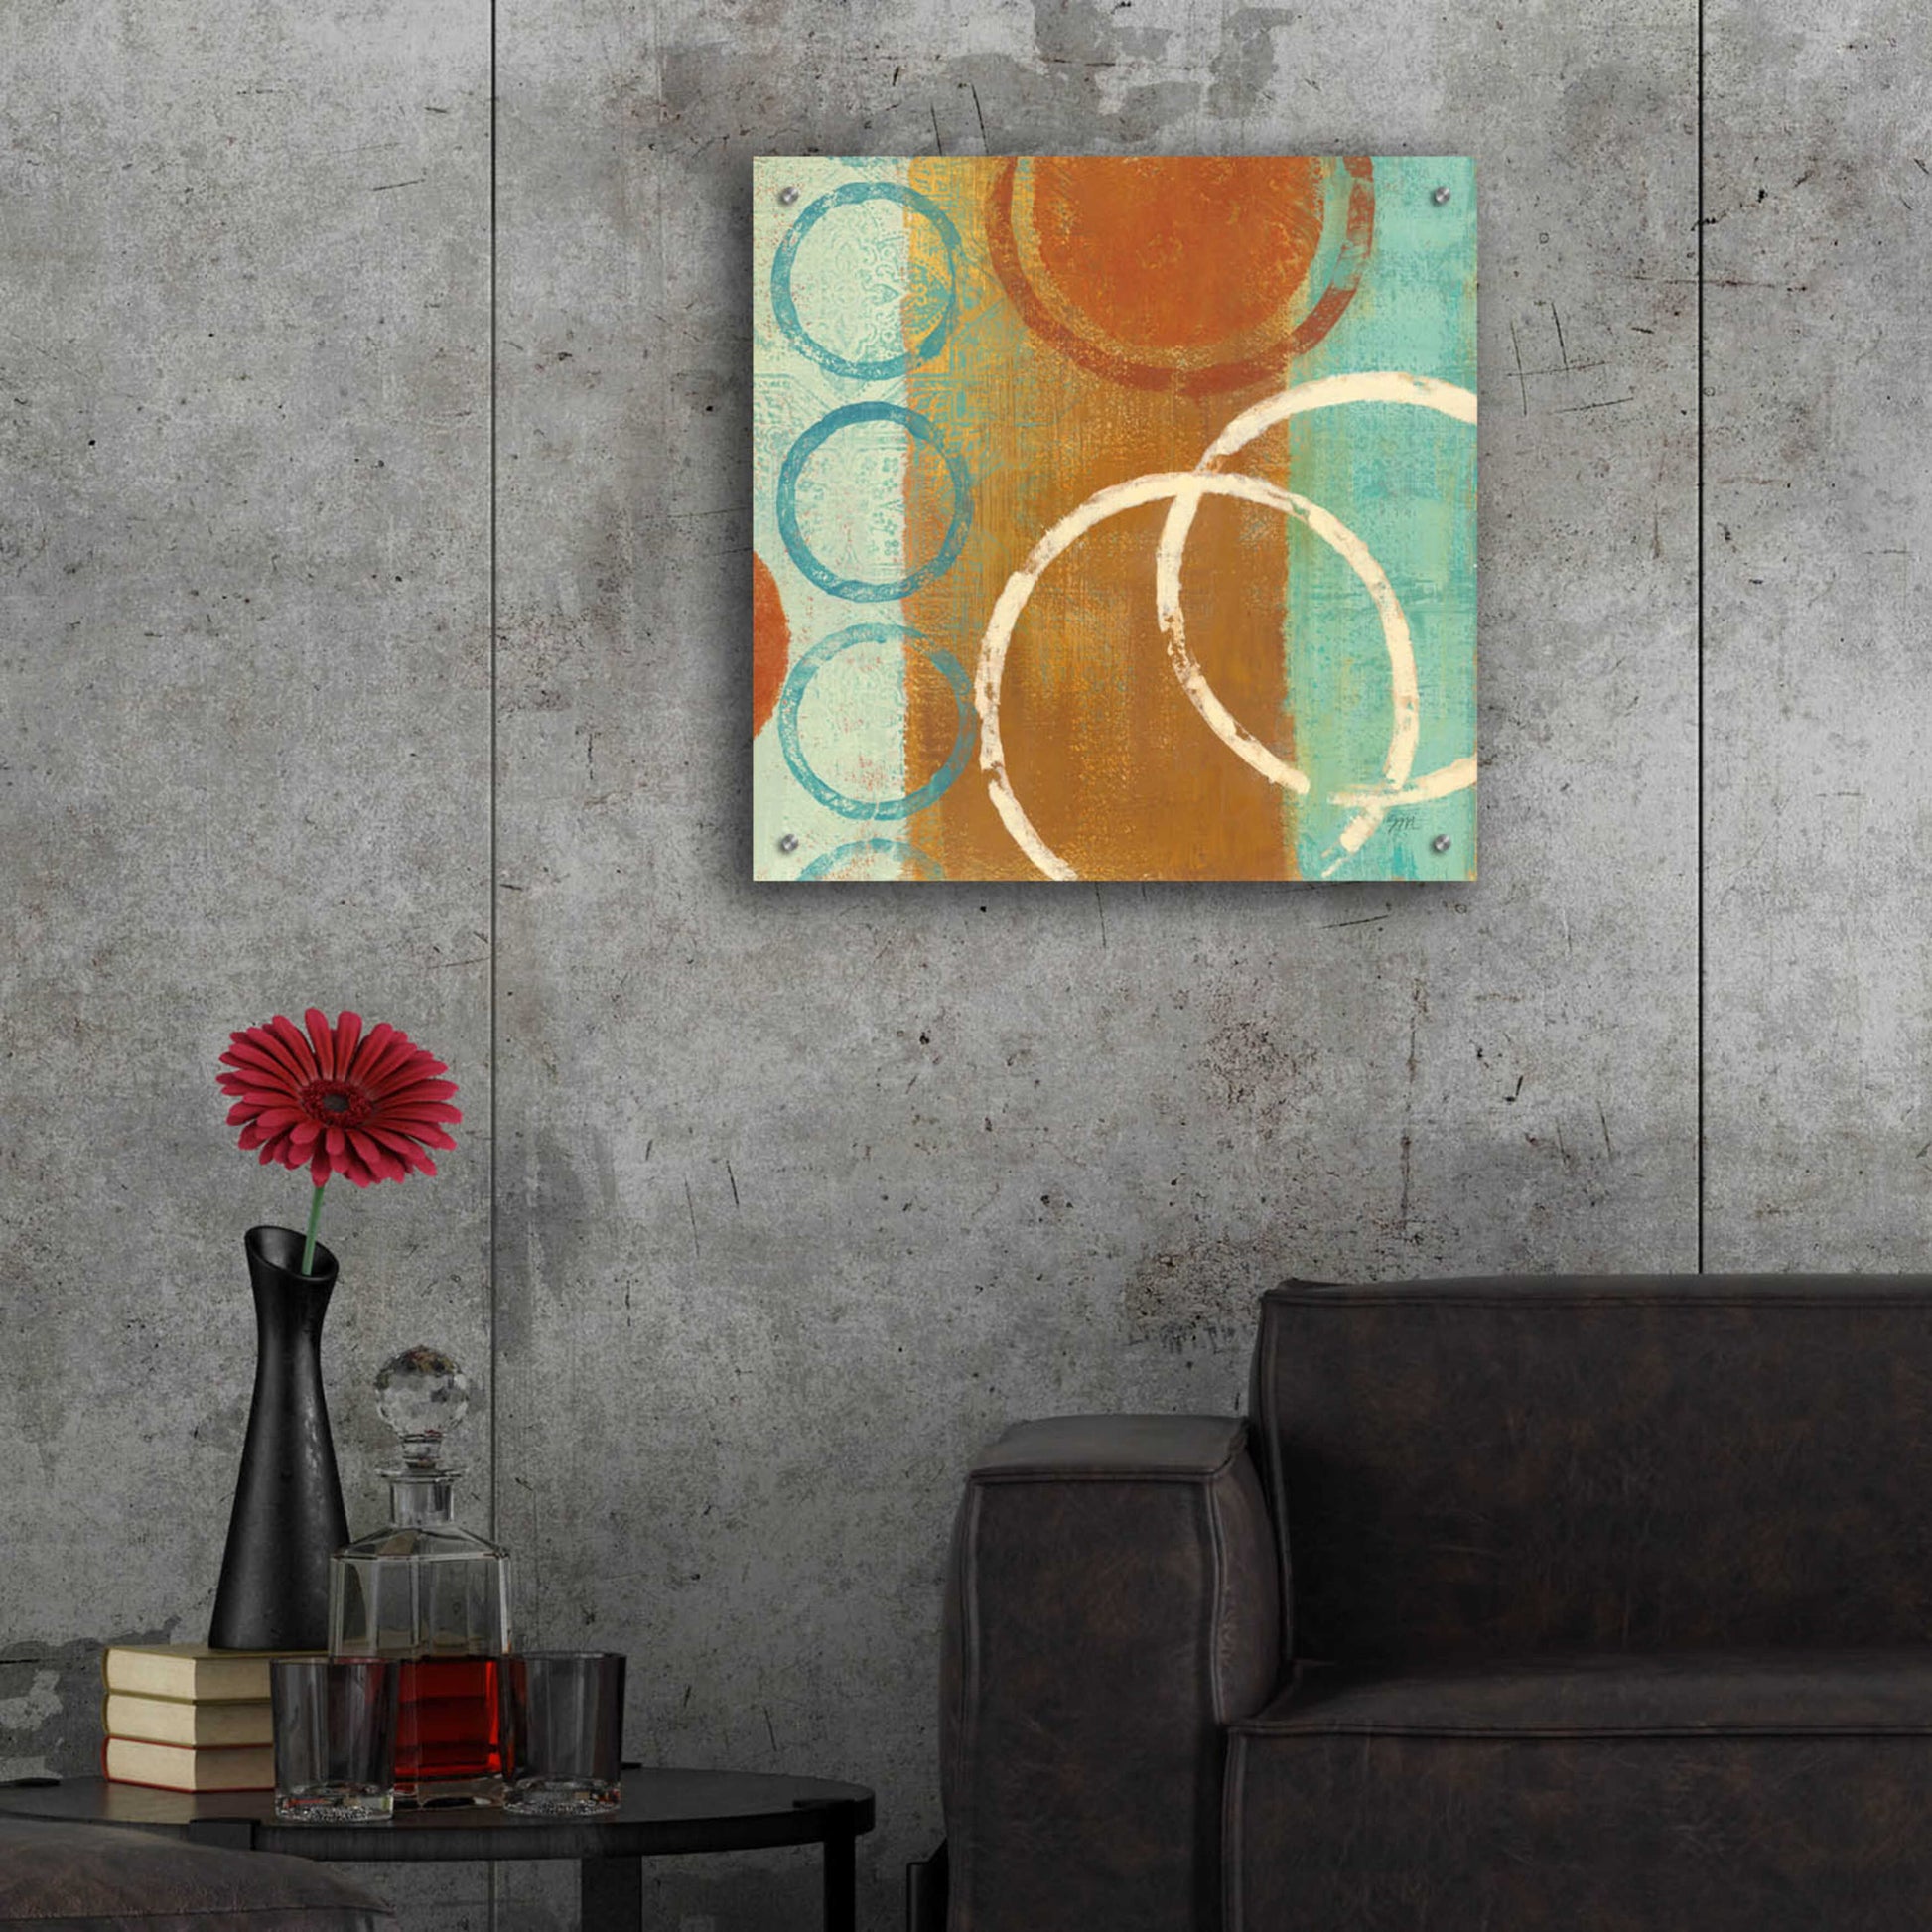 Epic Art 'Abstract of Circles' by Studio Mousseau, Acrylic Glass Wall Art,24x24